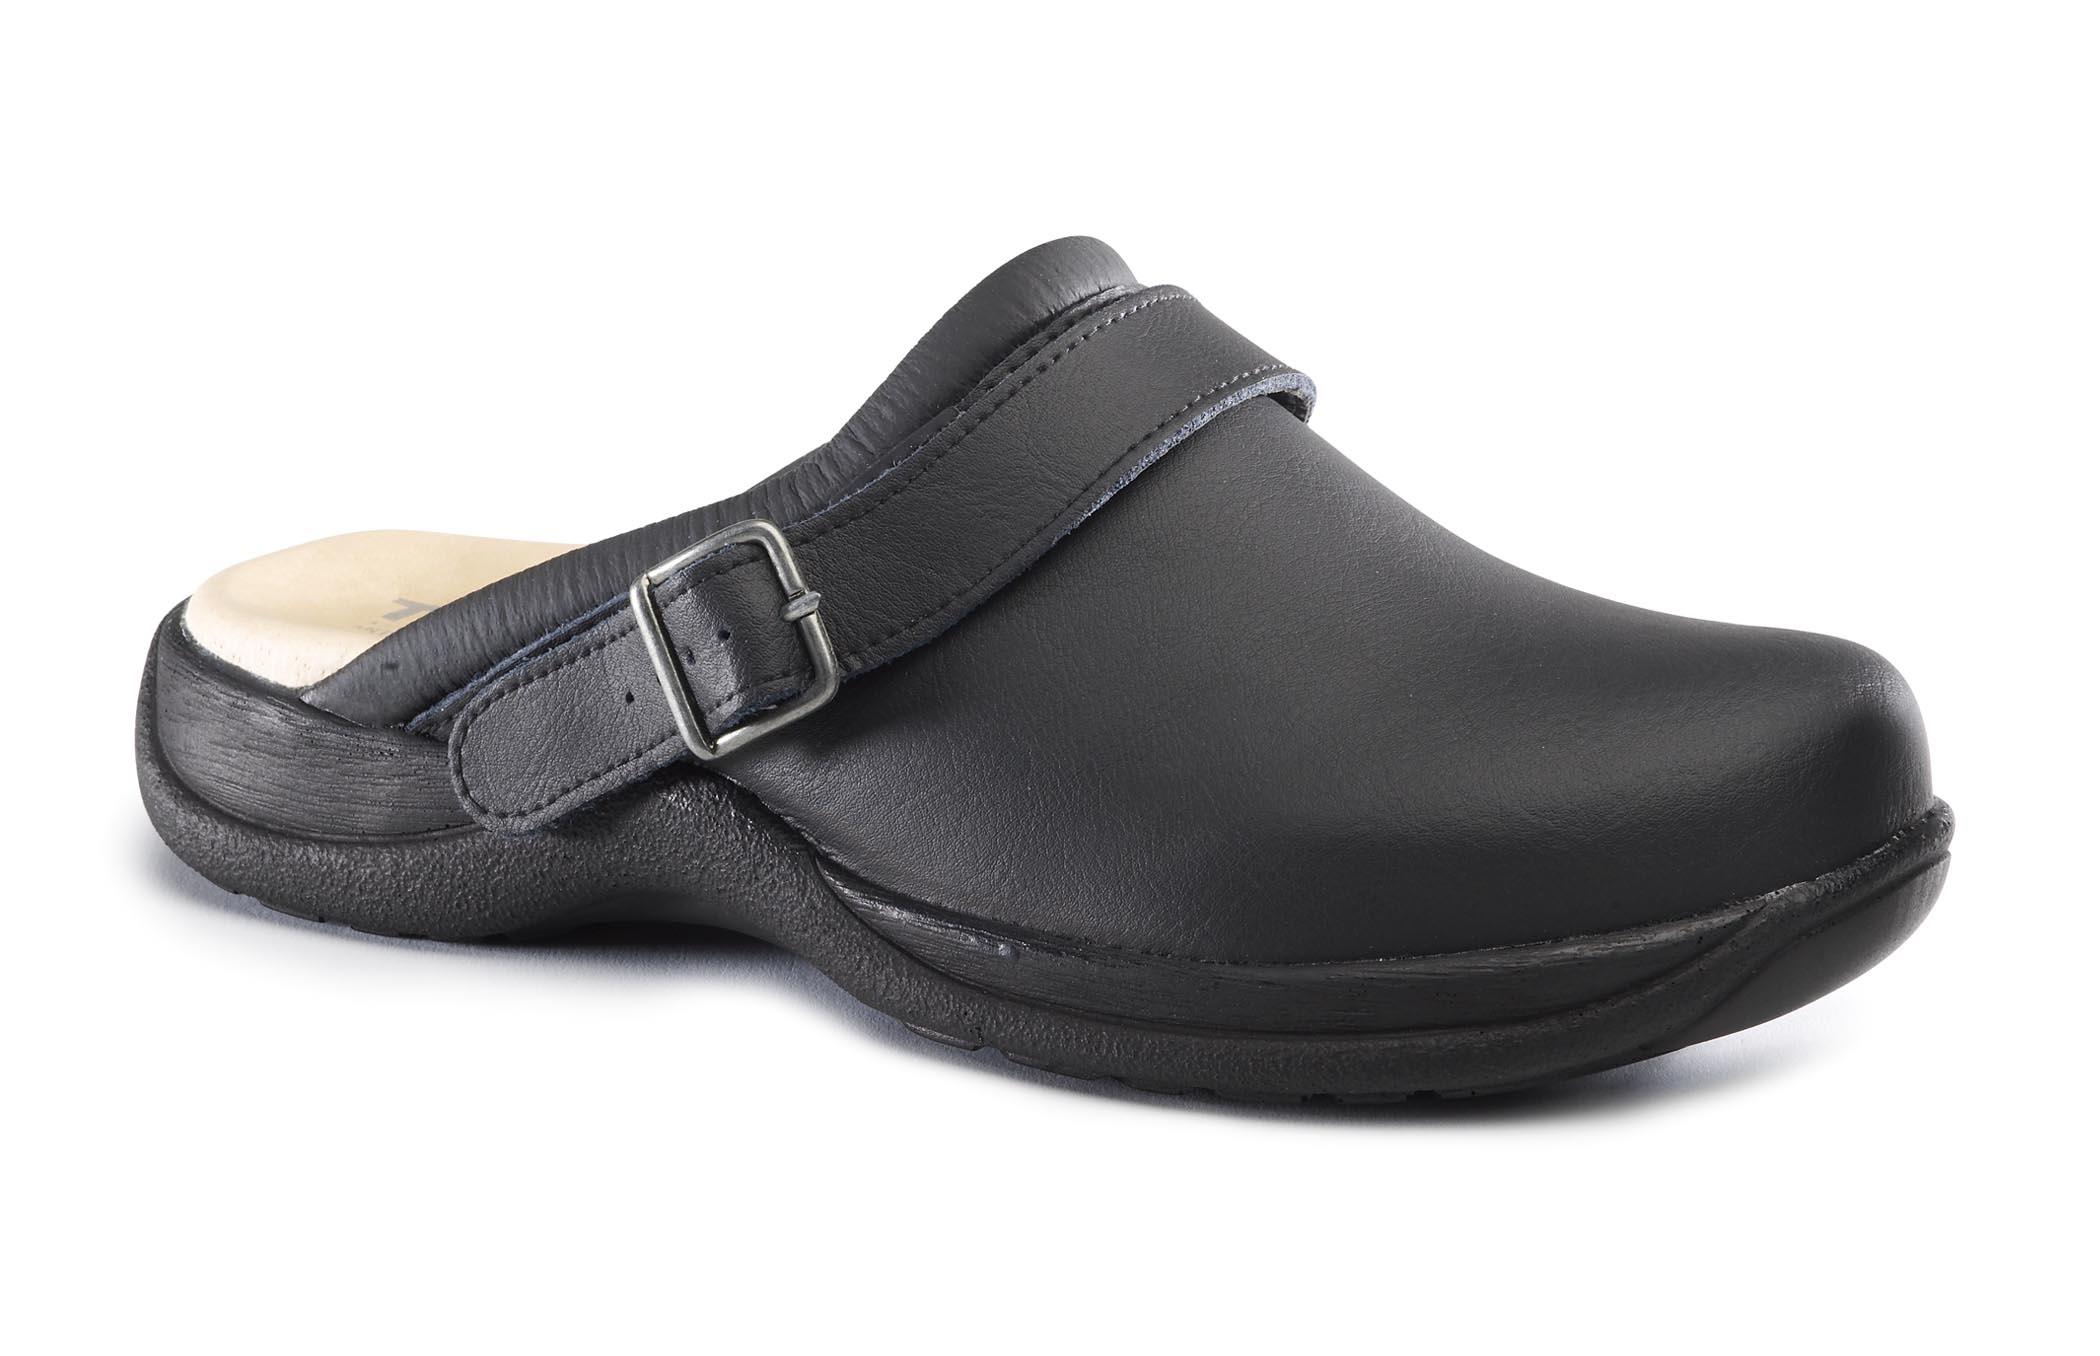 Toffeln Black Clog With Strap, Size 40 - Dentons